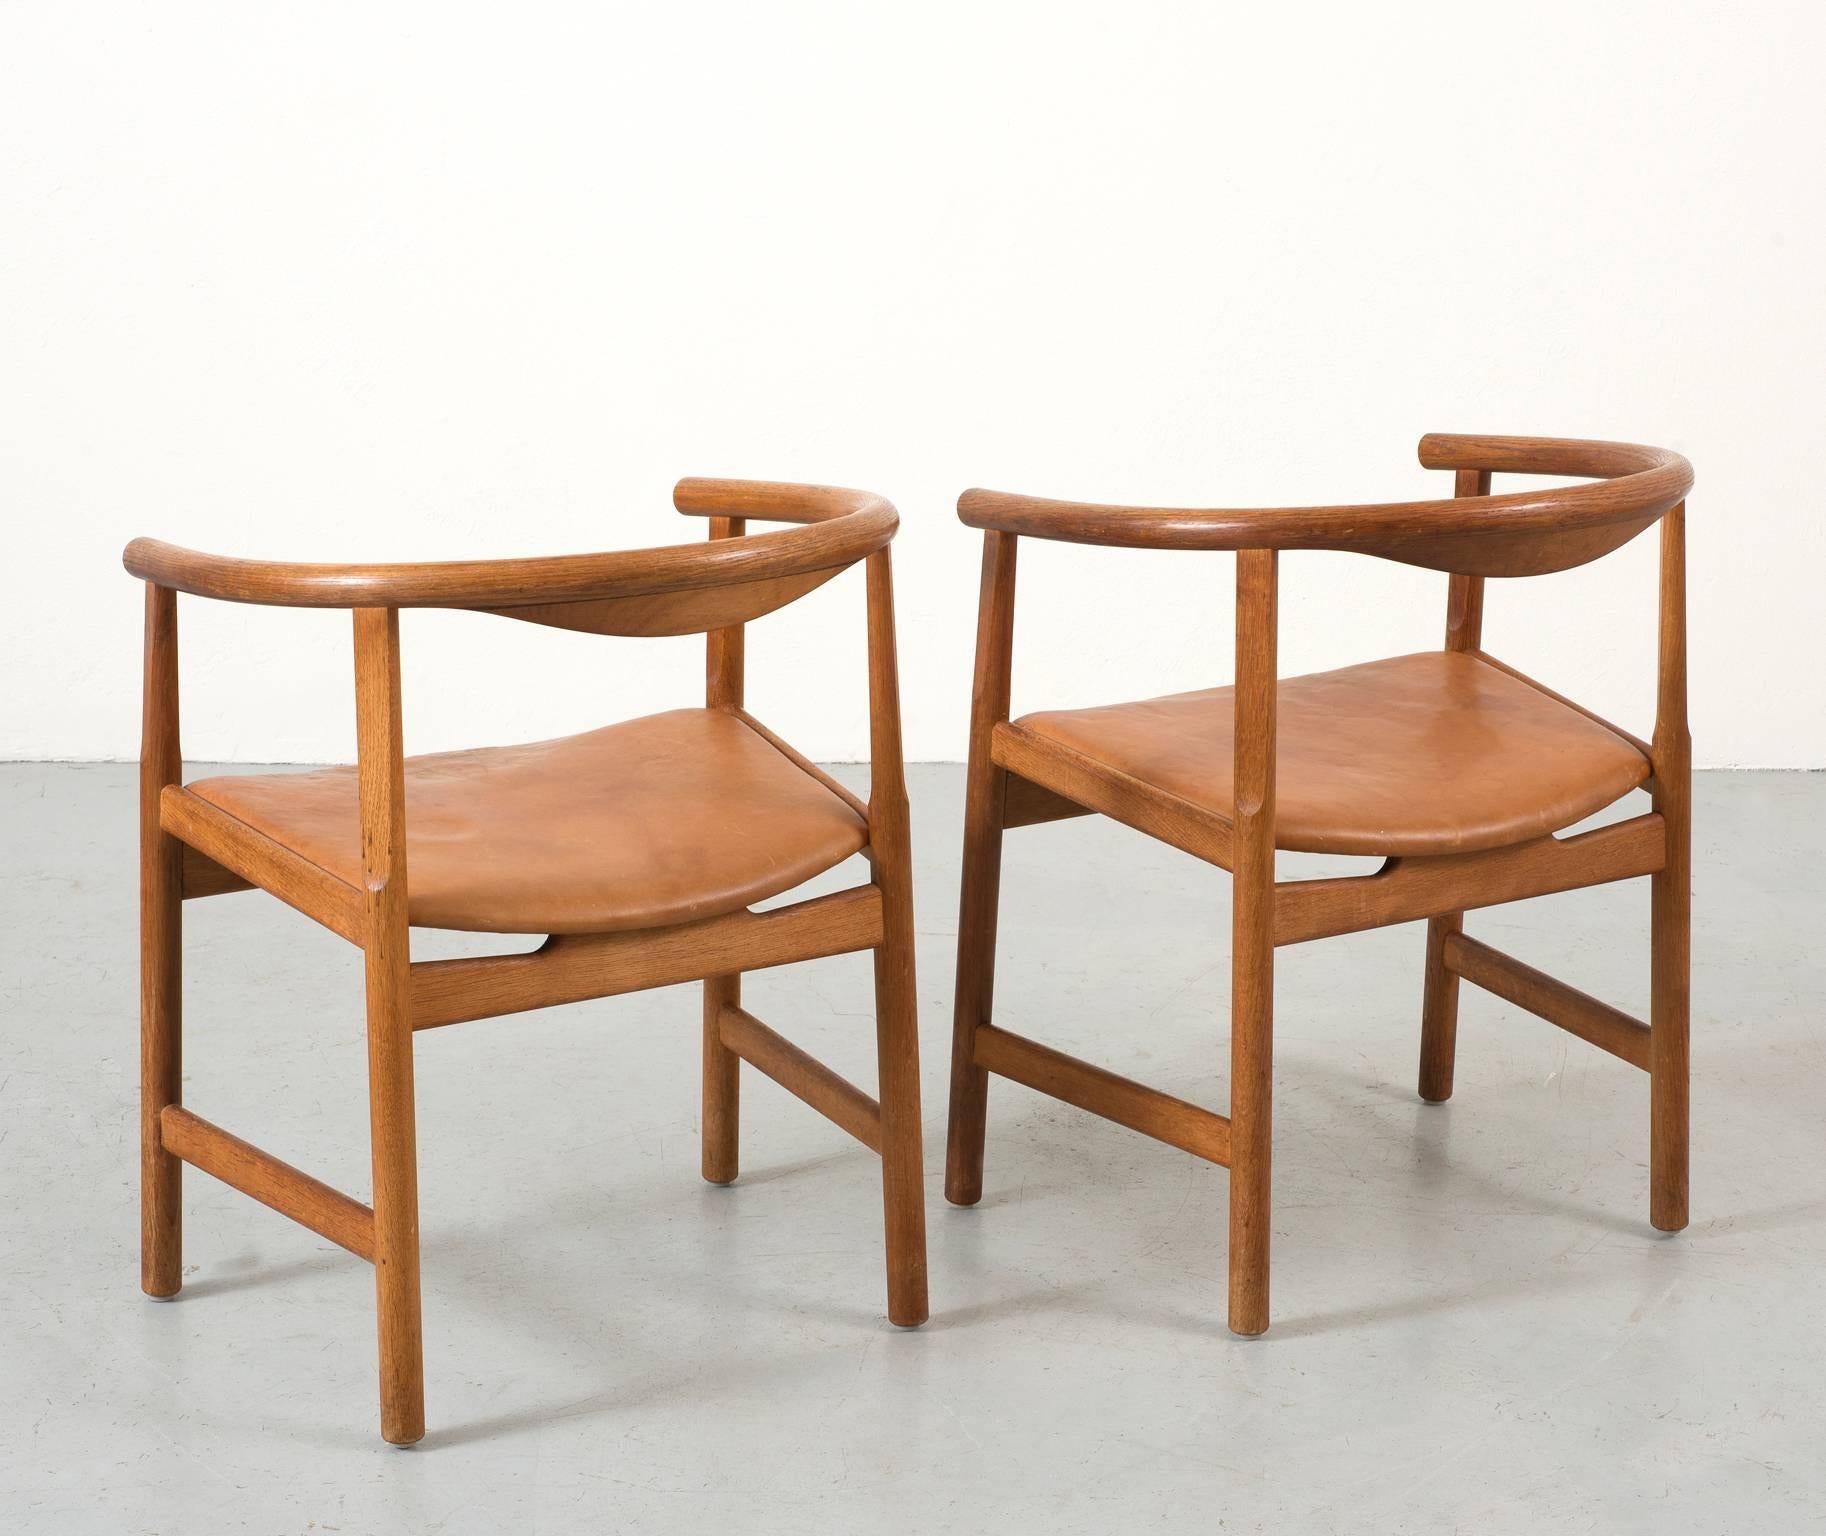 A pair of Hans Wegner armchairs in oak with wenge inlay. Seats in original leather with lovely patina. Produced for PP Mobler, Model PP 201, 1969.